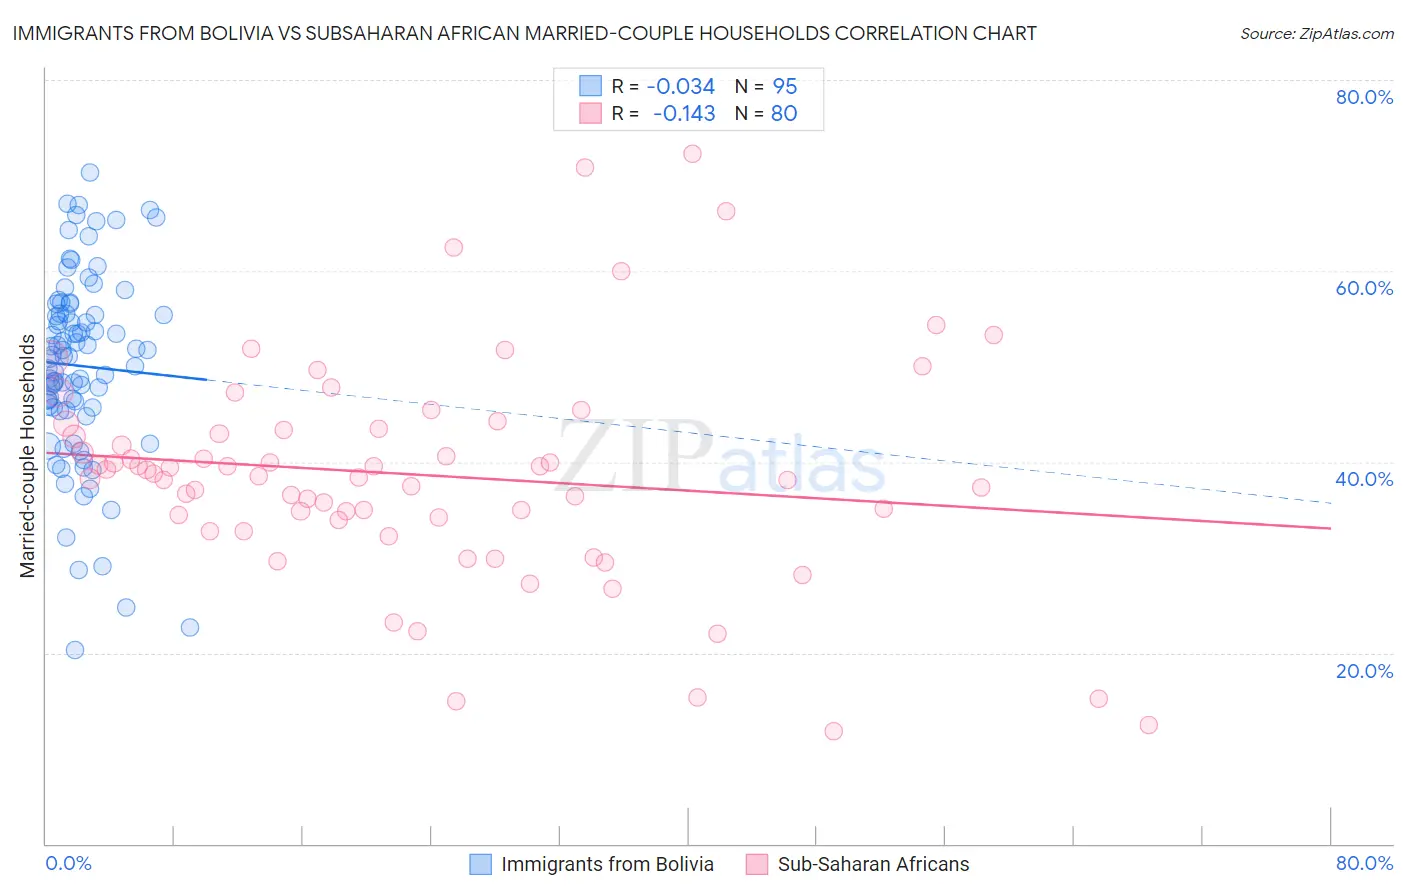 Immigrants from Bolivia vs Subsaharan African Married-couple Households